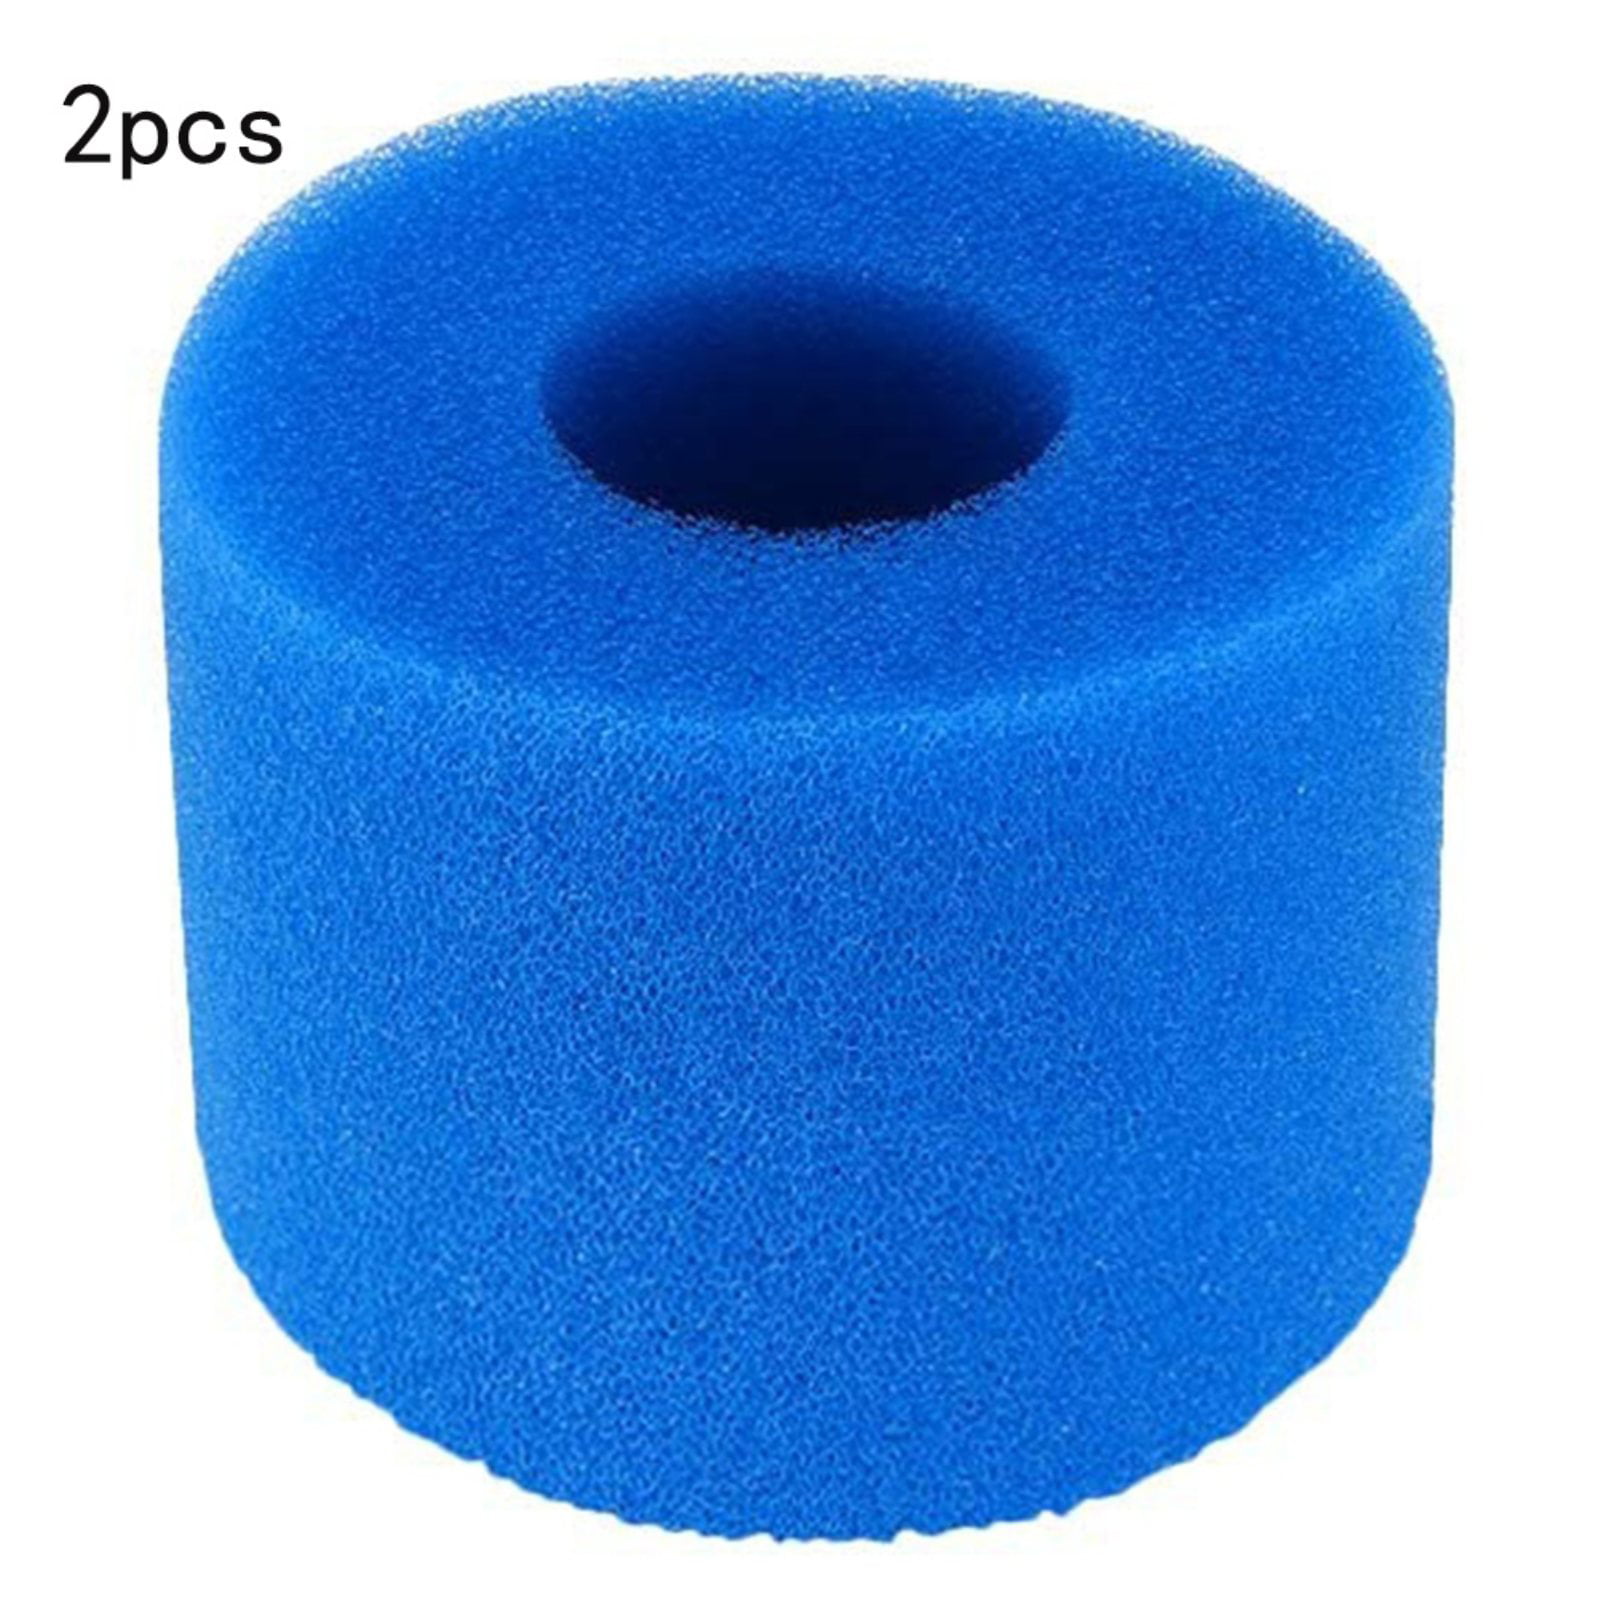 Details about   1*Washable Reusable Swimming Pool Filter Foam Sponge Cartridge For Intex Type A 